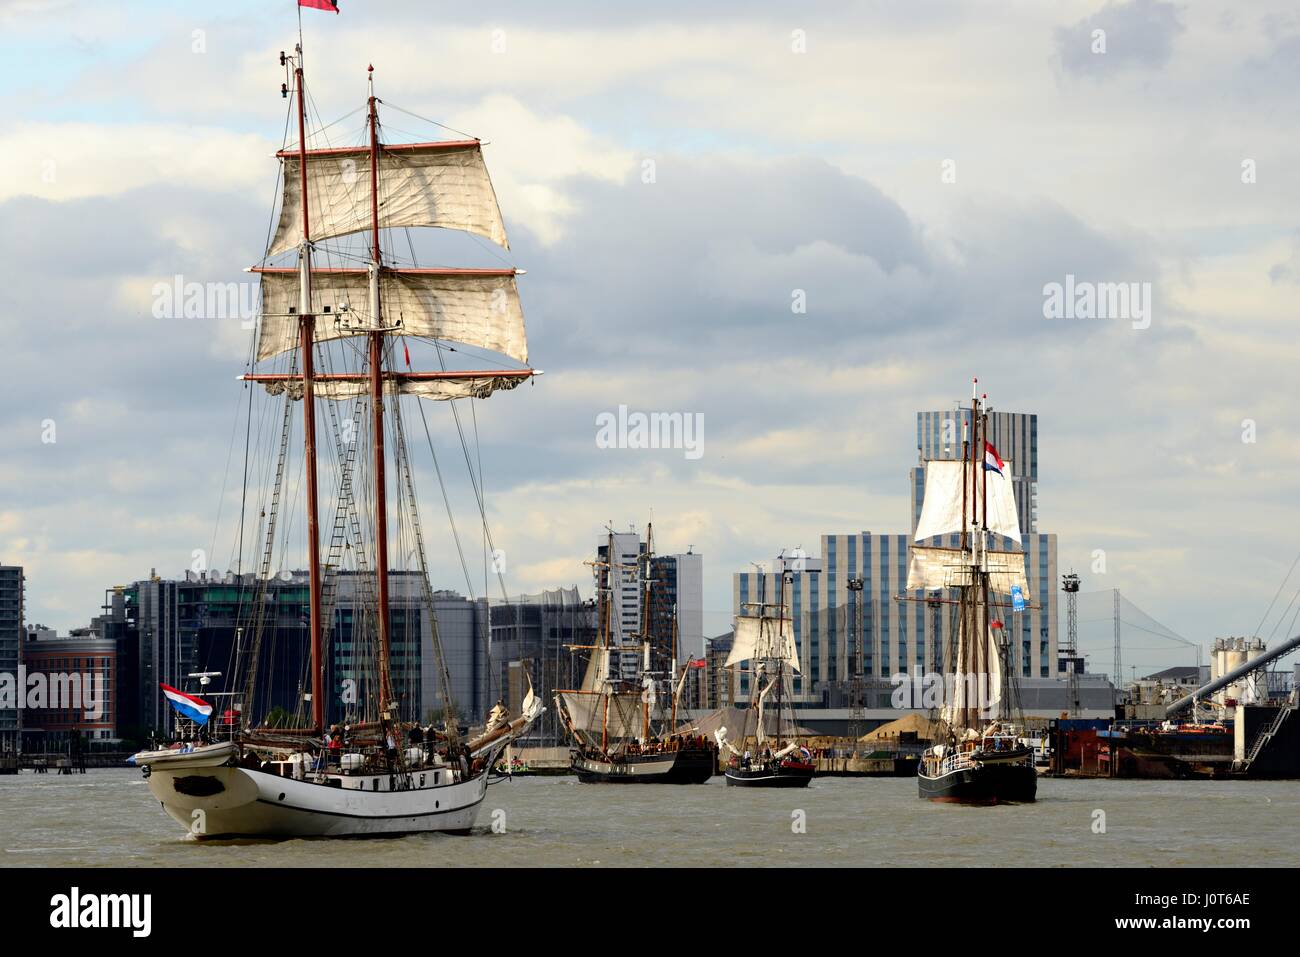 London, UK. 16th Apr, 2017. The tall ships regatta leaving London. Sailing down the Thames river from Greenwich to sail across the Atlantic to Canada. Photo taken on the south bank of the Thames between Greenwich and the O2 centre, on Sunday 16.4.2017. Credit: Mika Schick/Alamy Live News Stock Photo